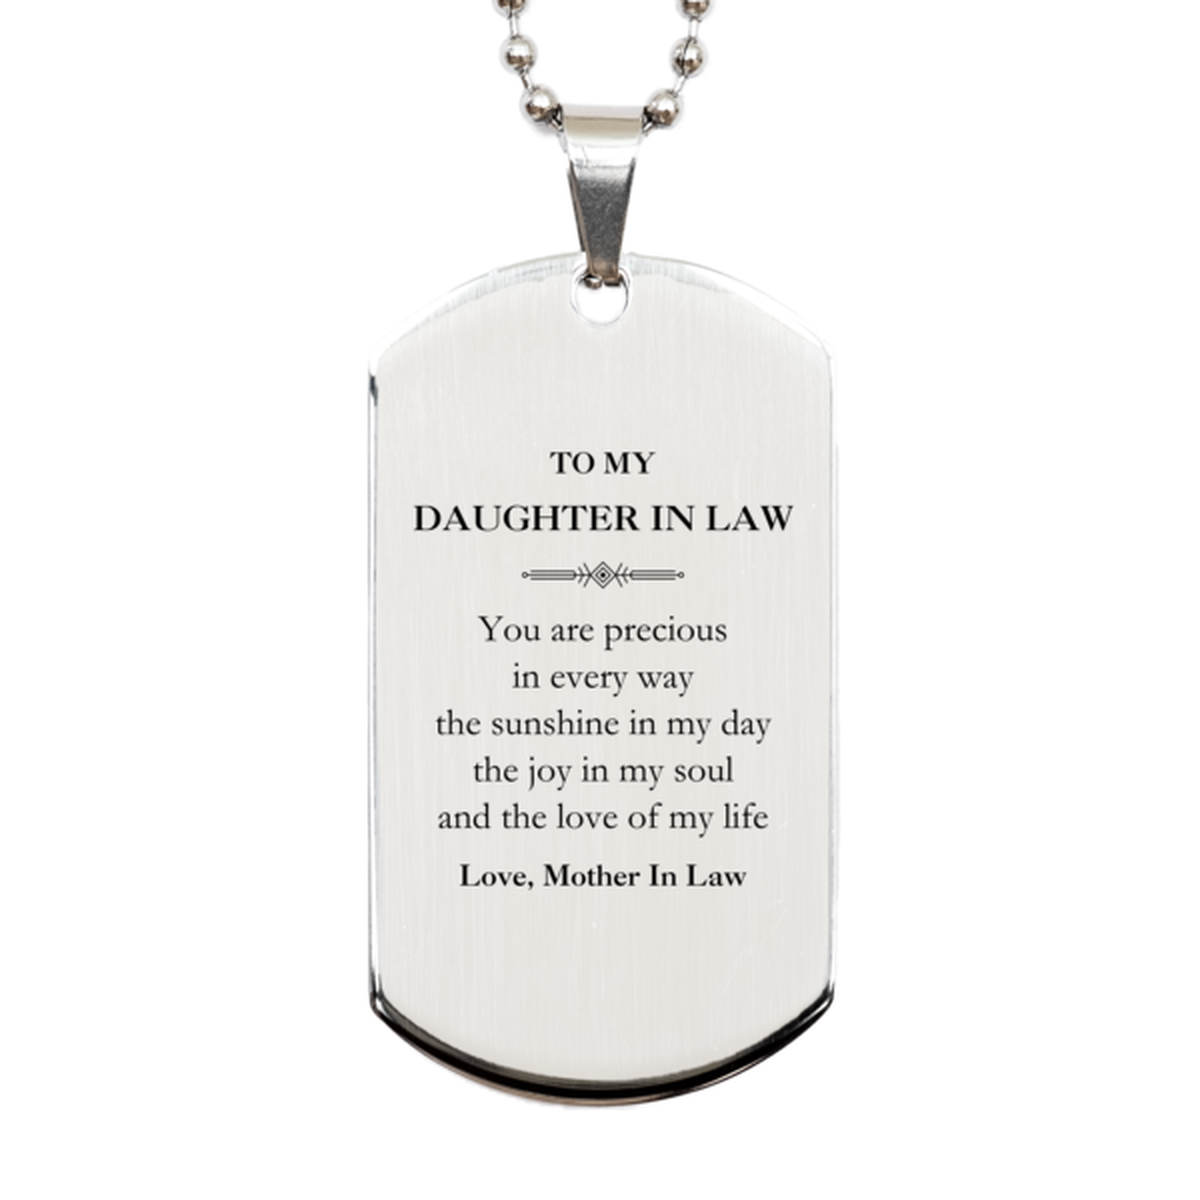 Graduation Gifts for Daughter In Law Silver Dog Tag Present from Mother In Law, Christmas Daughter In Law Birthday Gifts Daughter In Law You are precious in every way the sunshine in my day. Love, Mother In Law